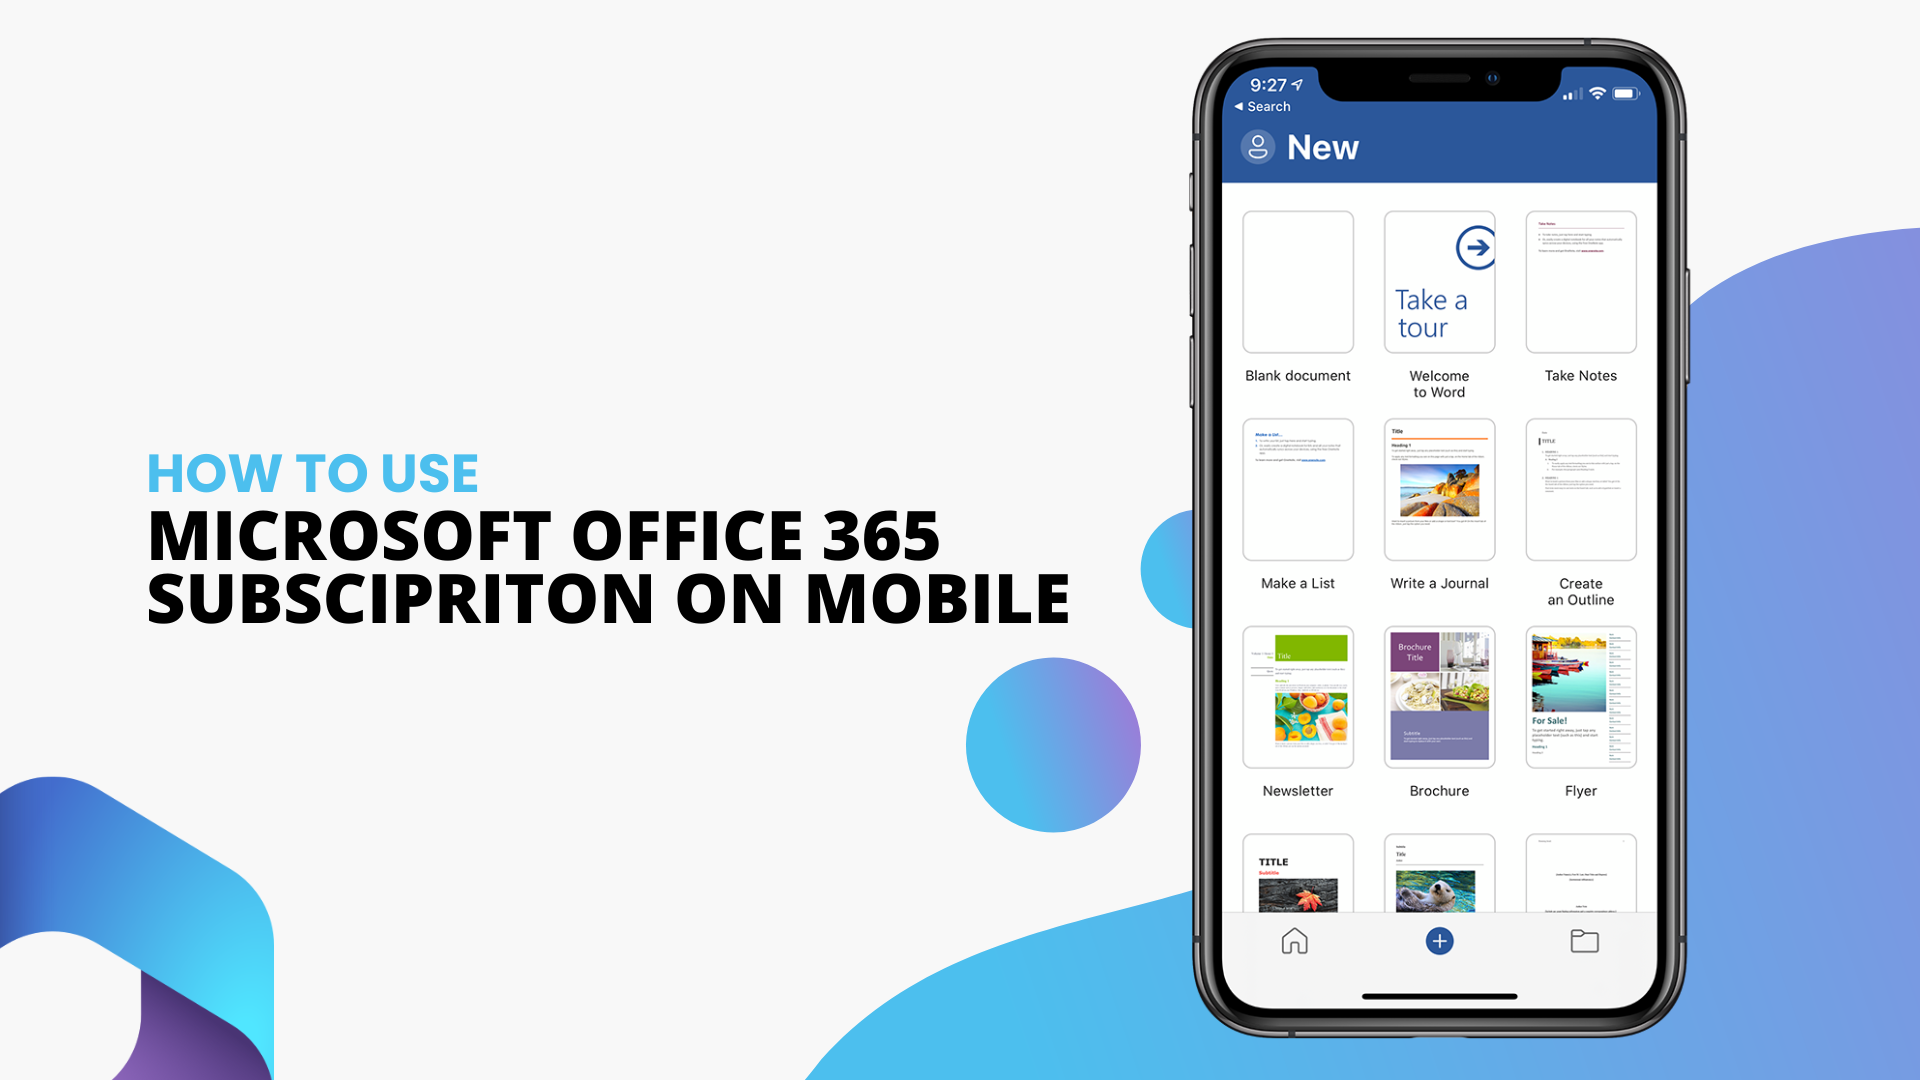 How To Use Office Apps on a Mobile Device With Office 365 Subscription